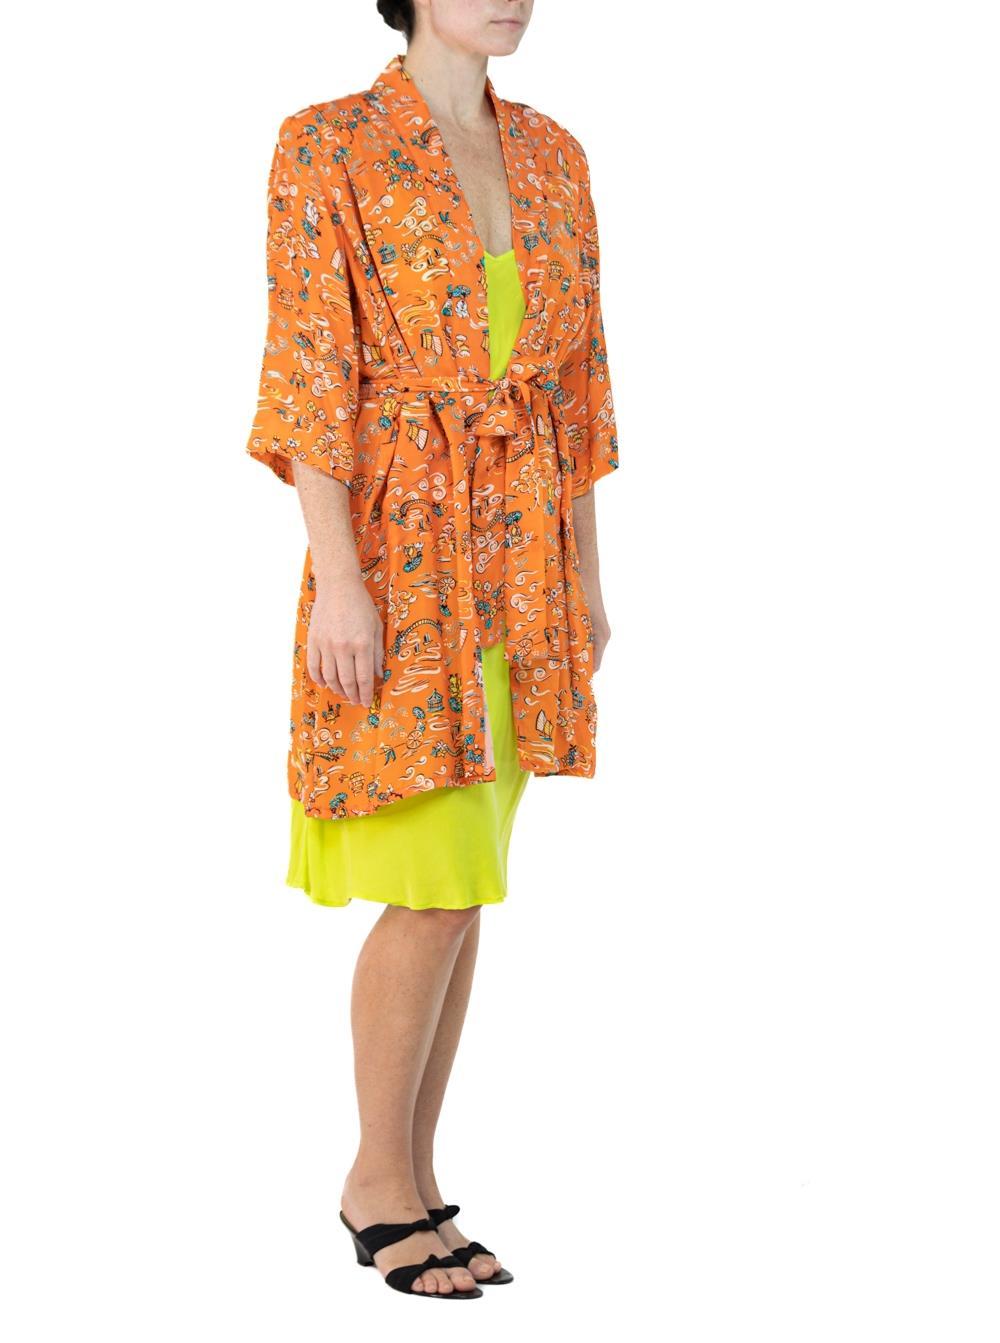 Women's Morphew Collection Orange & Yellow Cherry Blossom Novelty Print Cold Rayon Bias For Sale